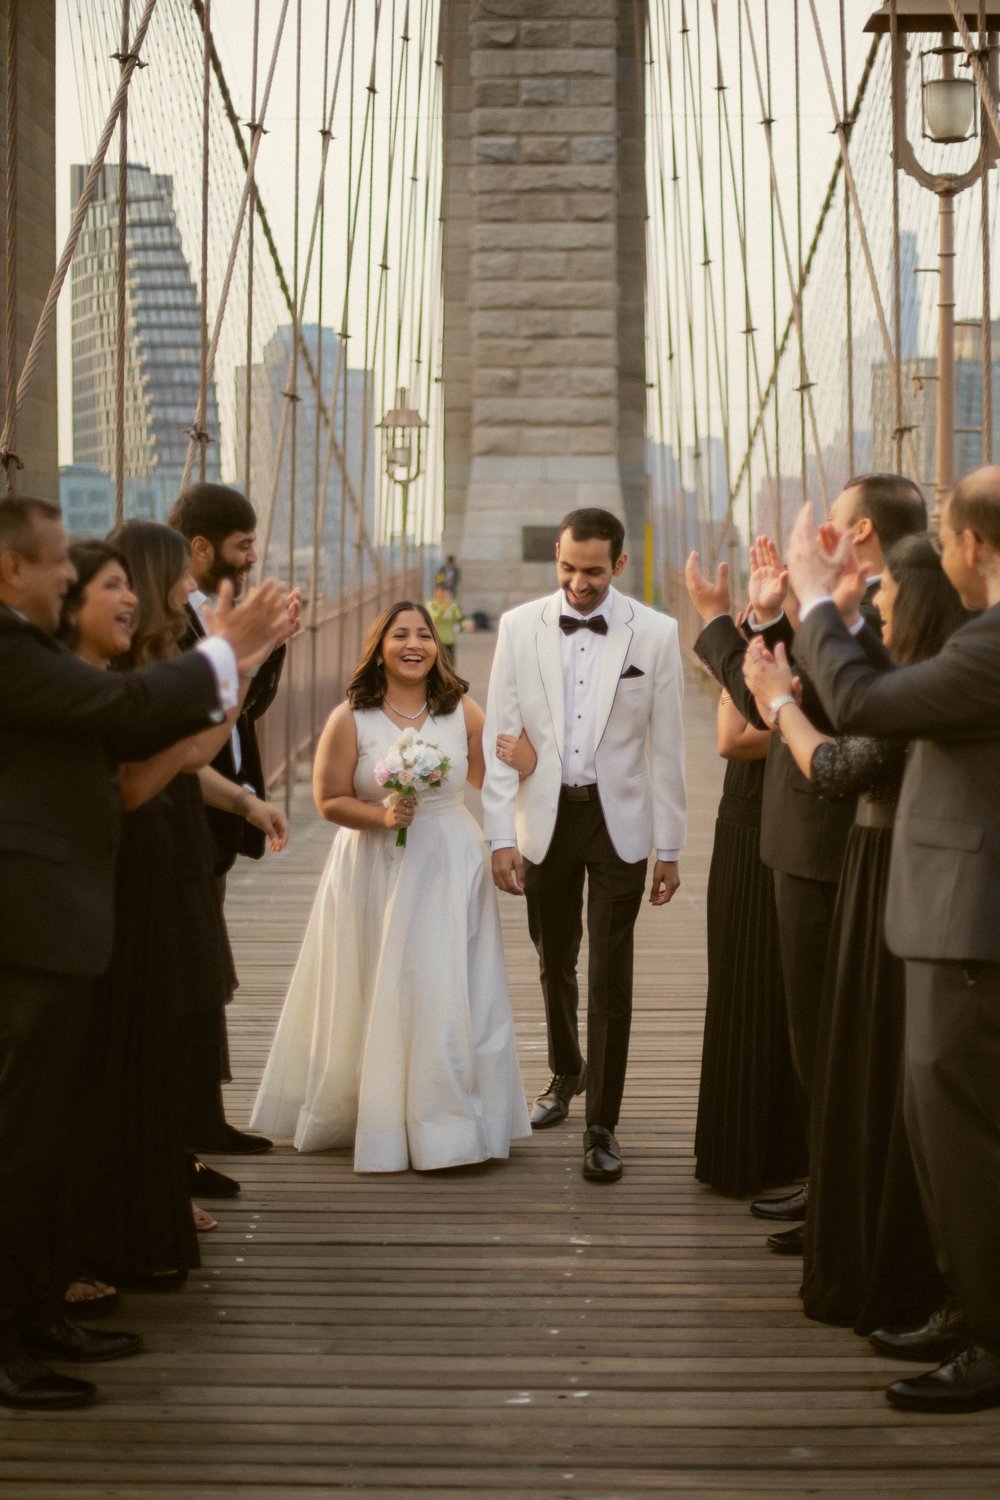 Experience the joy and excitement of Misha and Sahil's early morning wedding as the sun rises over the iconic BrooklynBridge